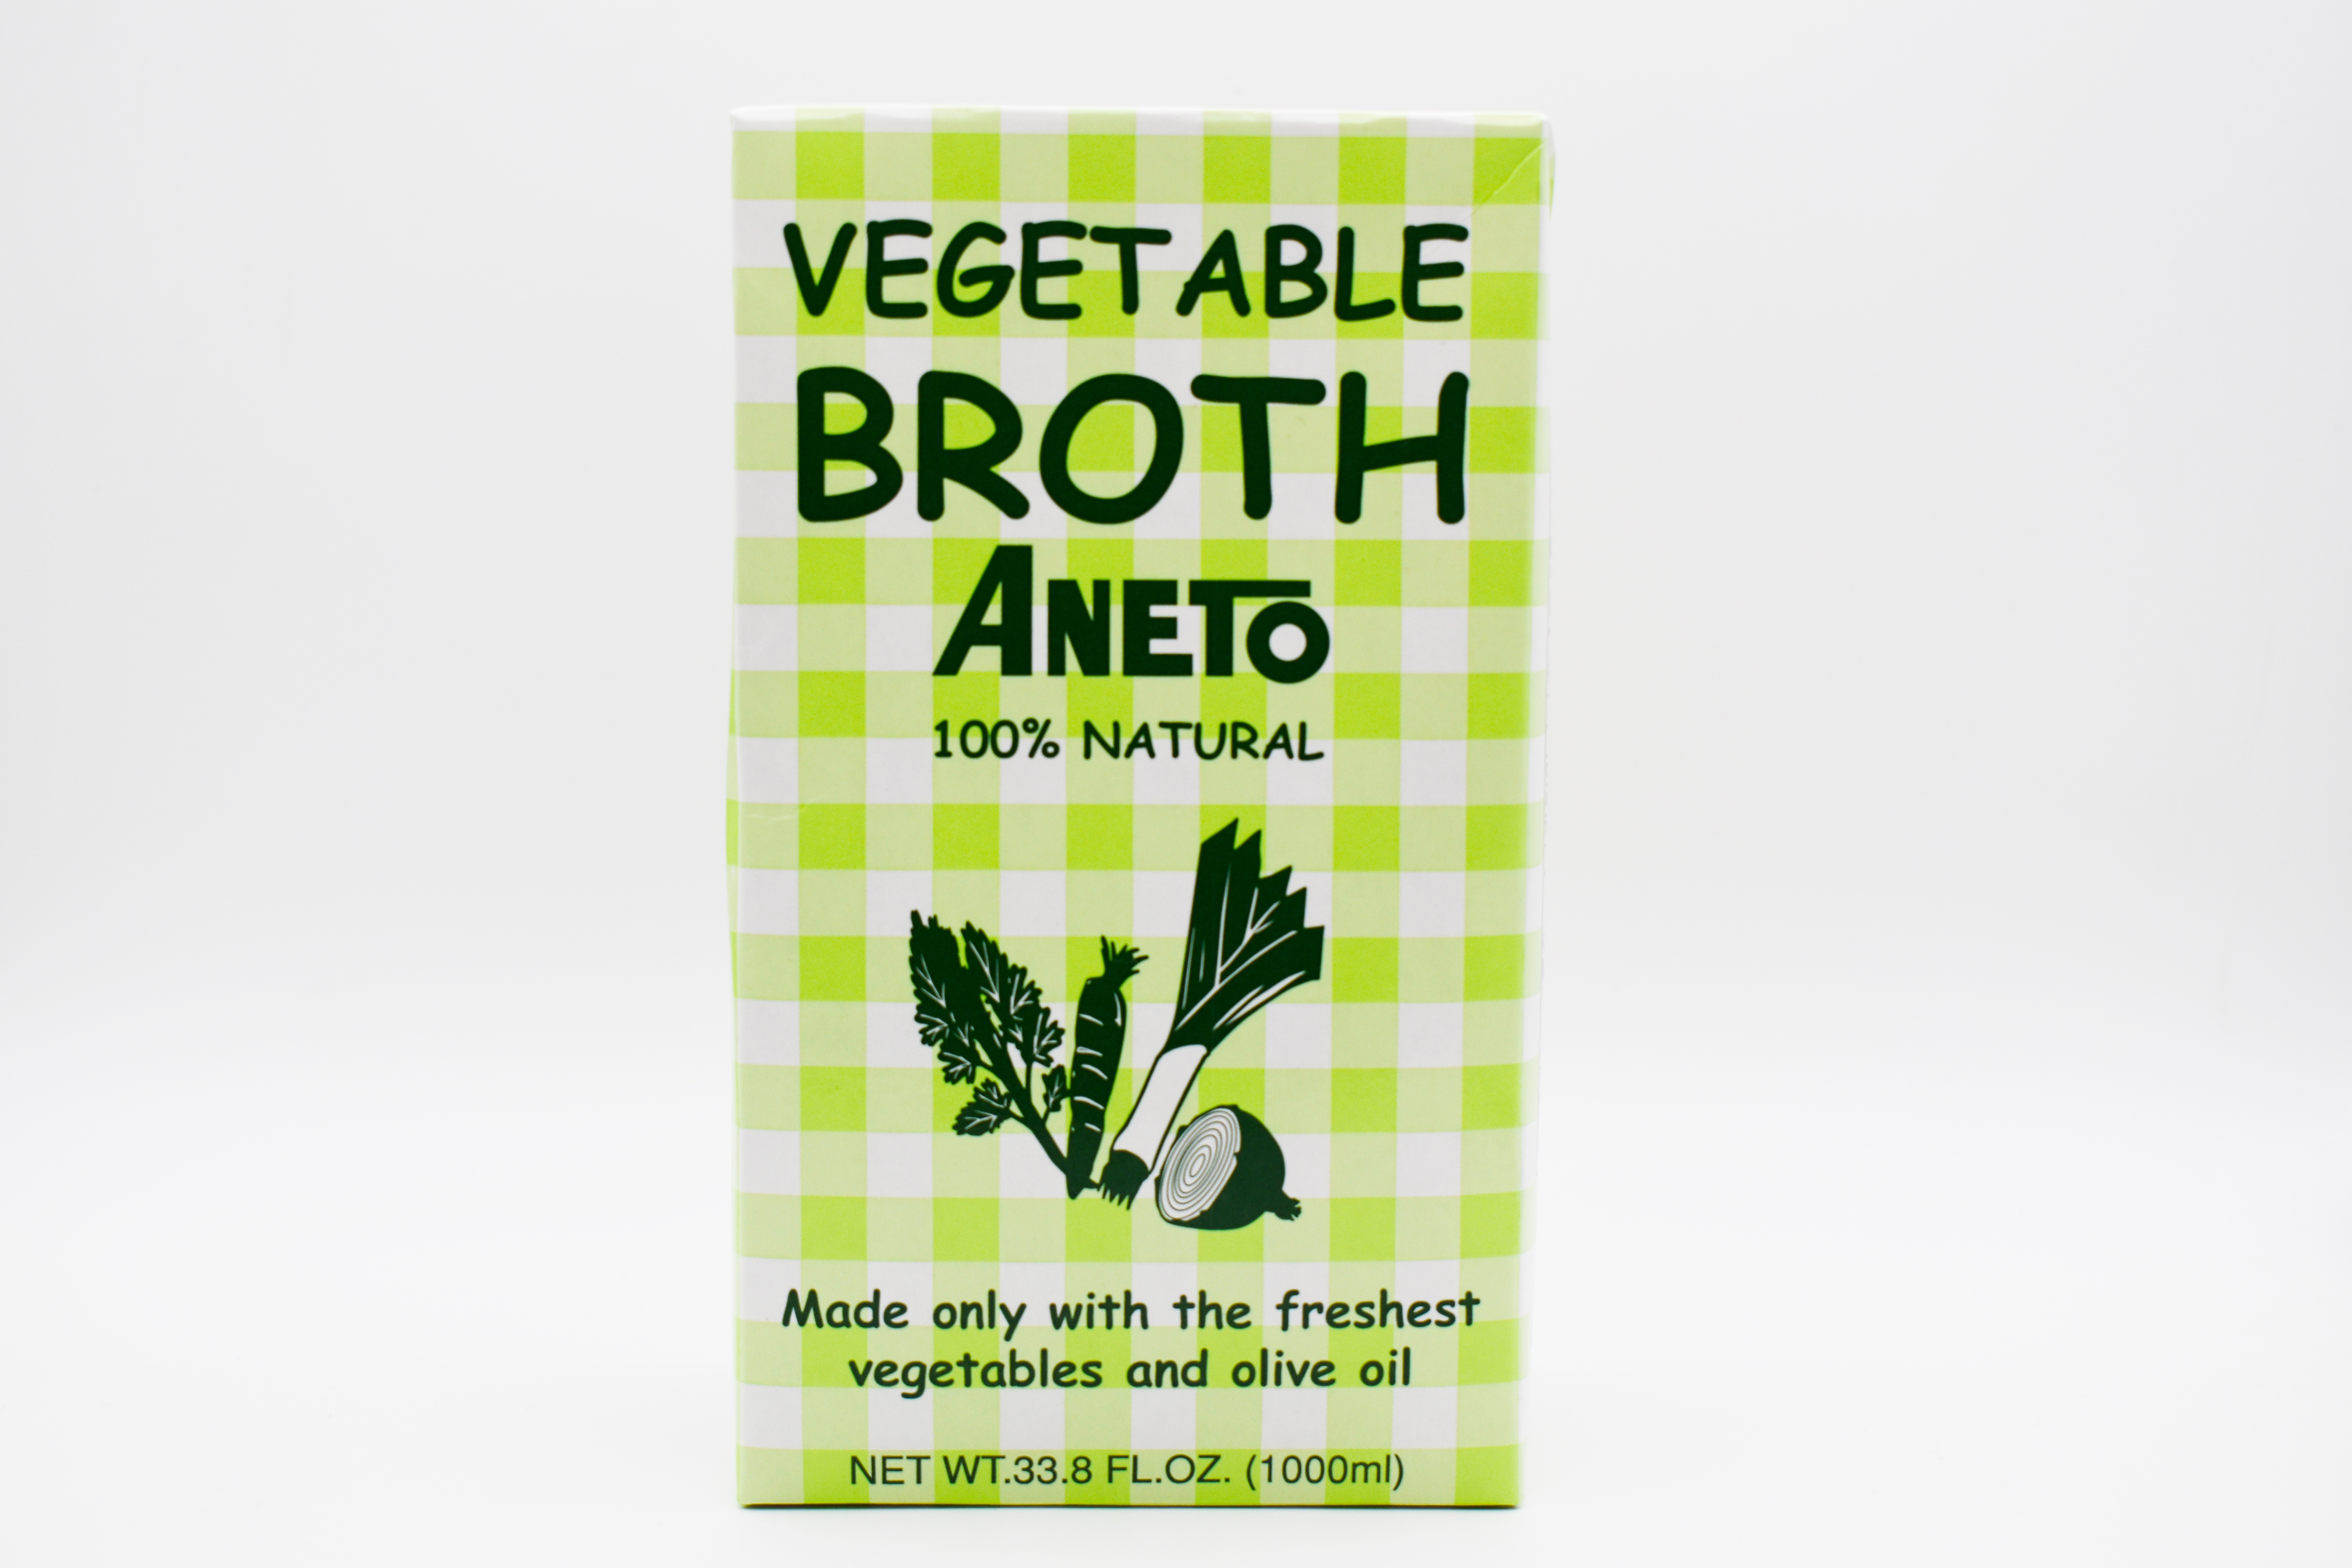 Product Image for Aneto Vegetable Broth